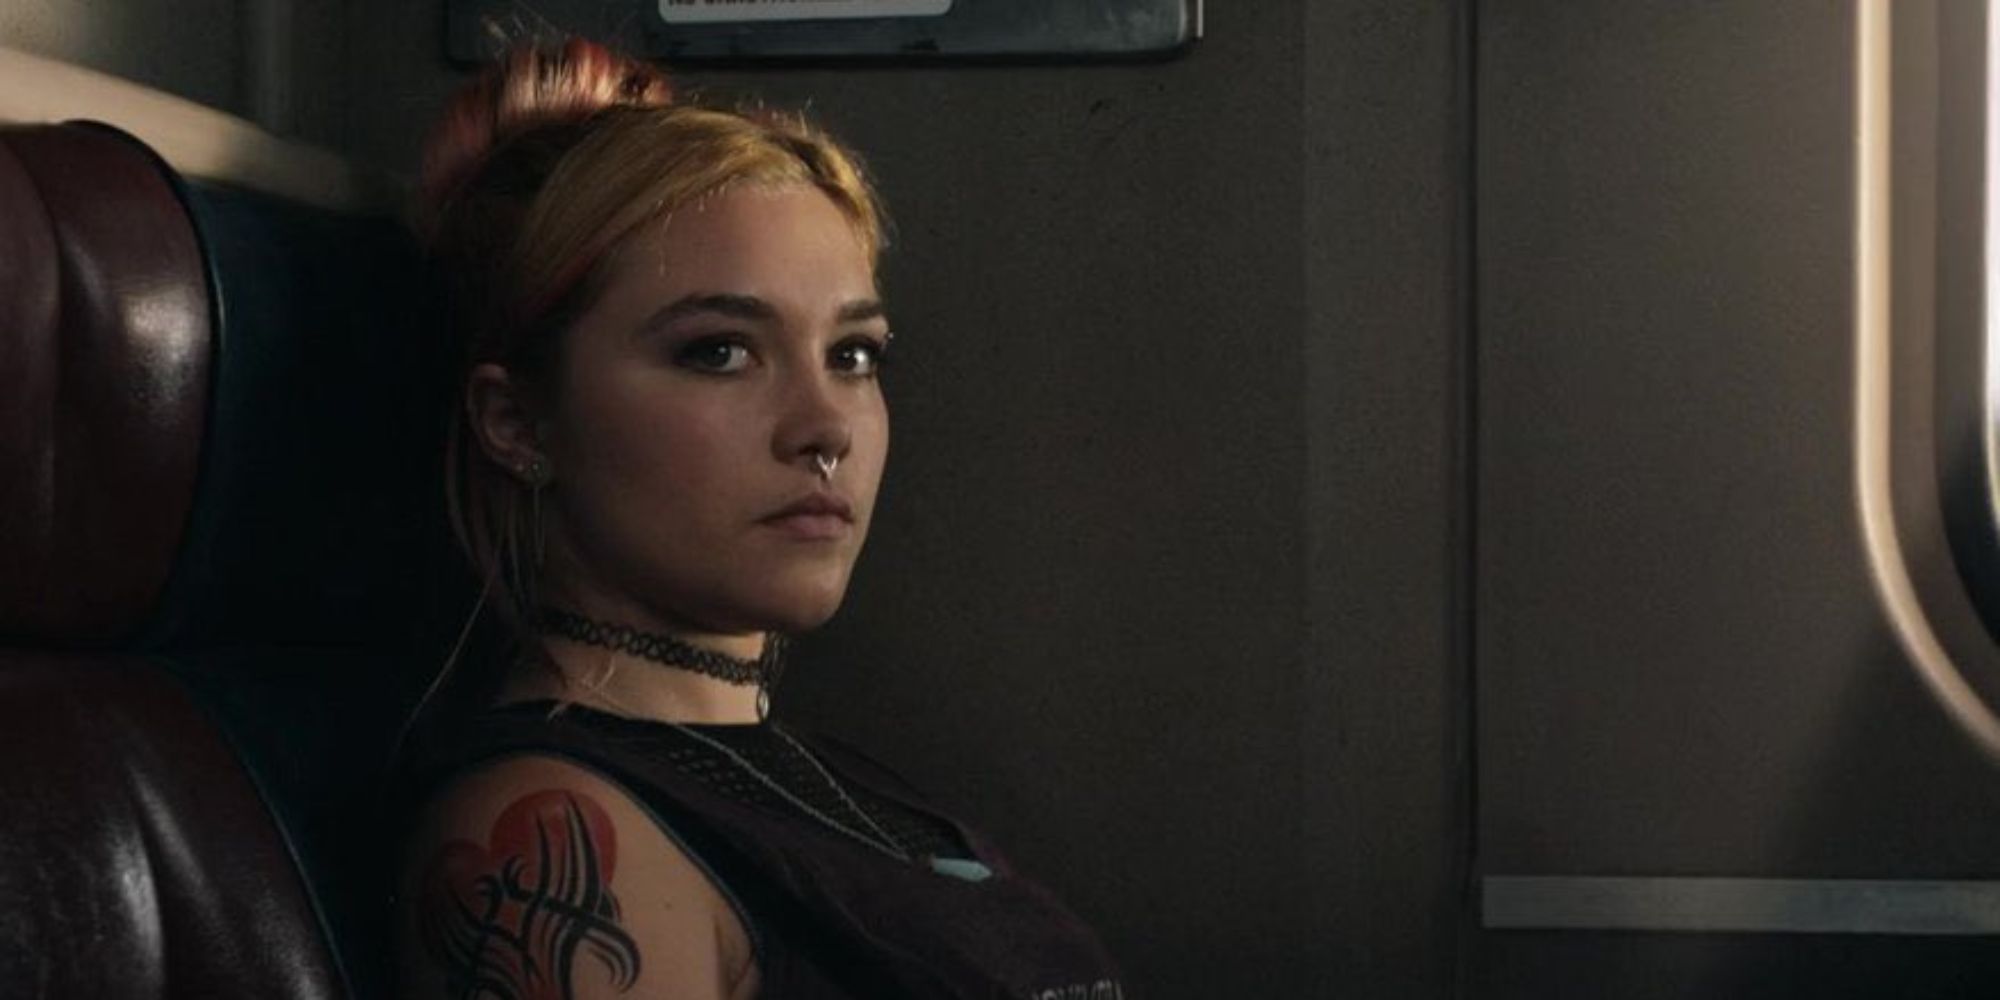 A young woman with face piercing and tattos looks annoyed on a train